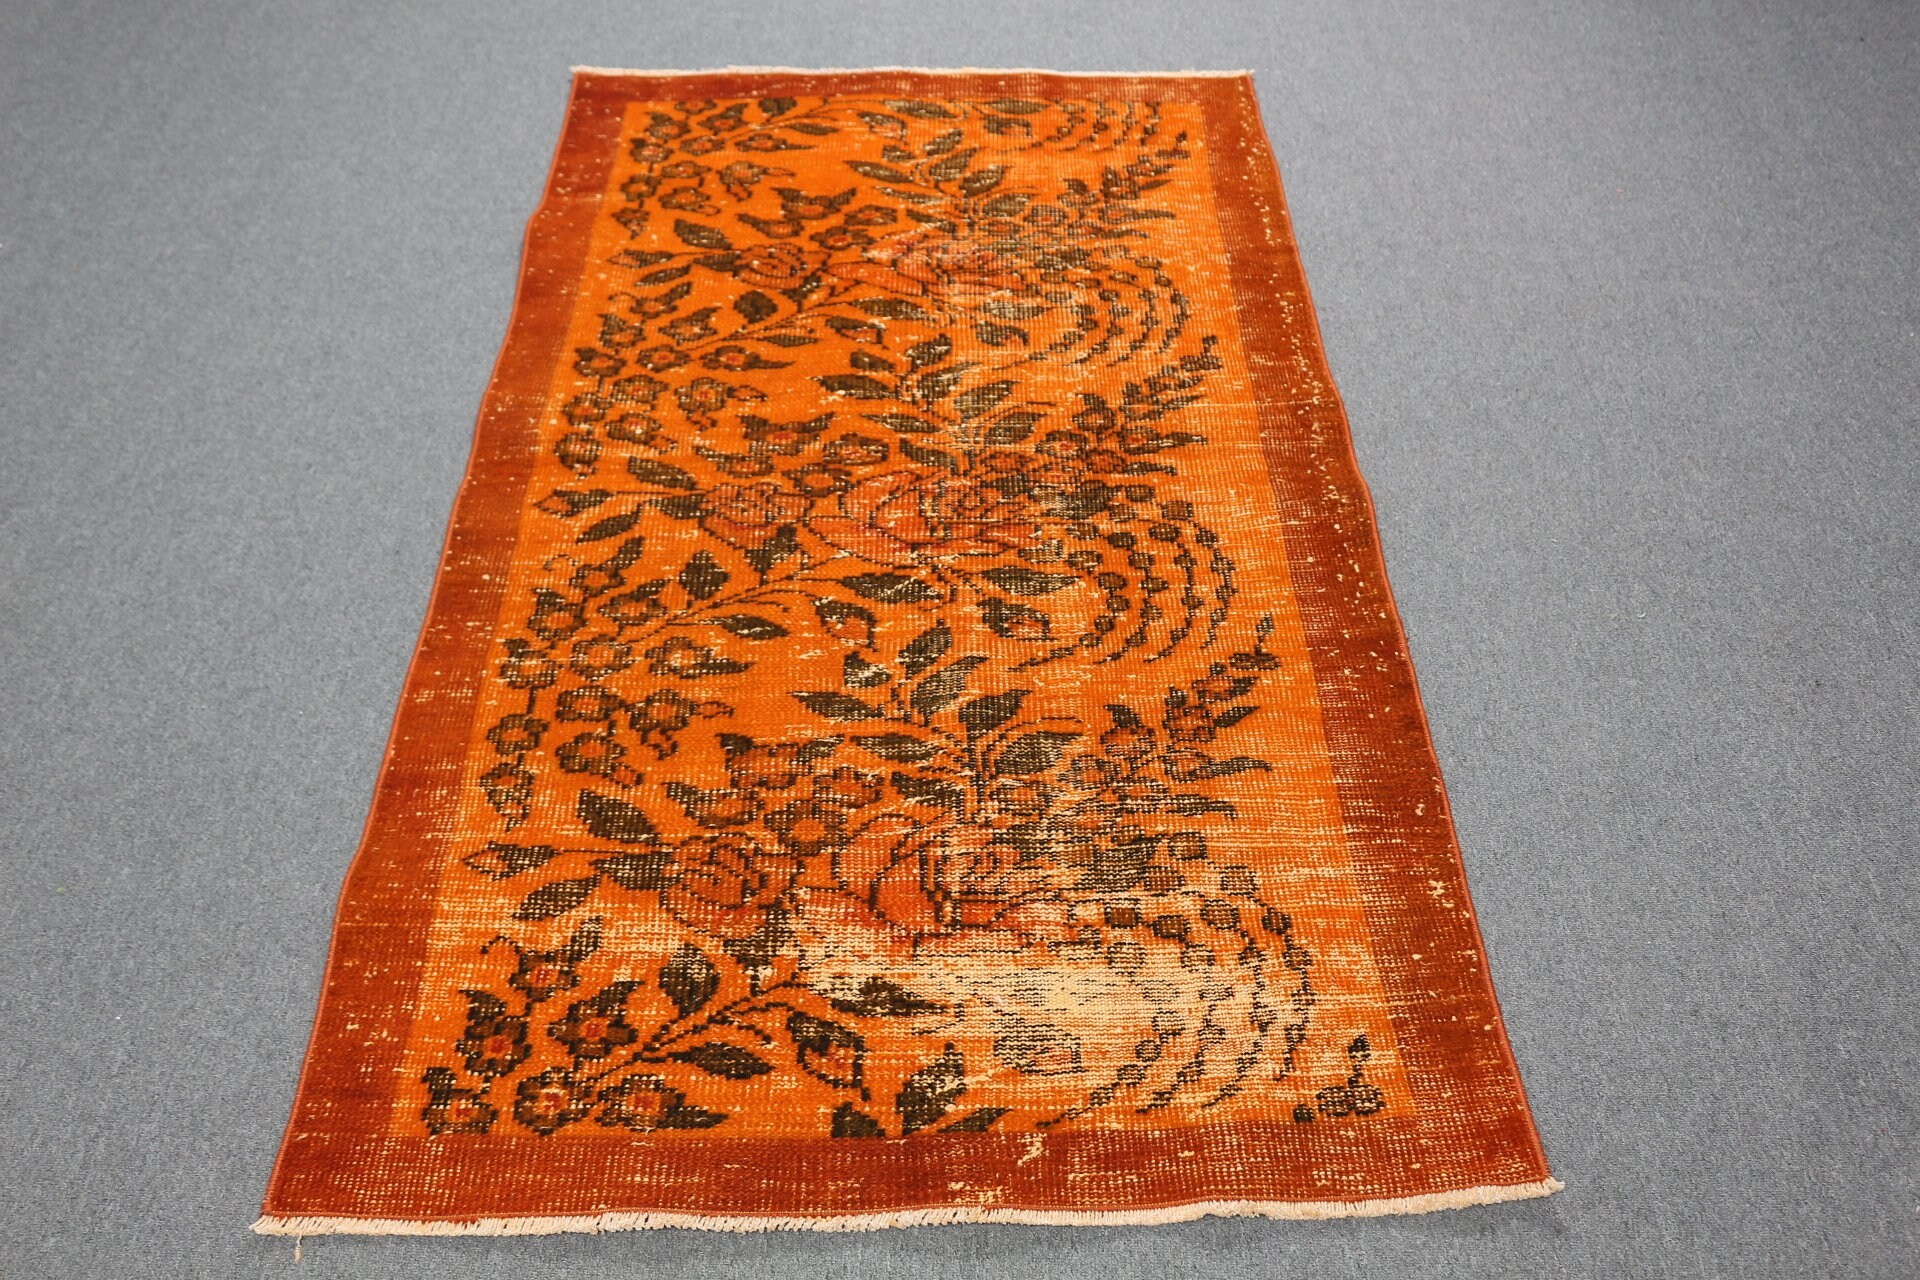 Vintage Decor Rug, Orange Wool Rugs, Vintage Rugs, Turkish Rugs, Entry Rug, Rugs for Entry, Cool Rugs, Kitchen Rug, 3.3x6 ft Accent Rug